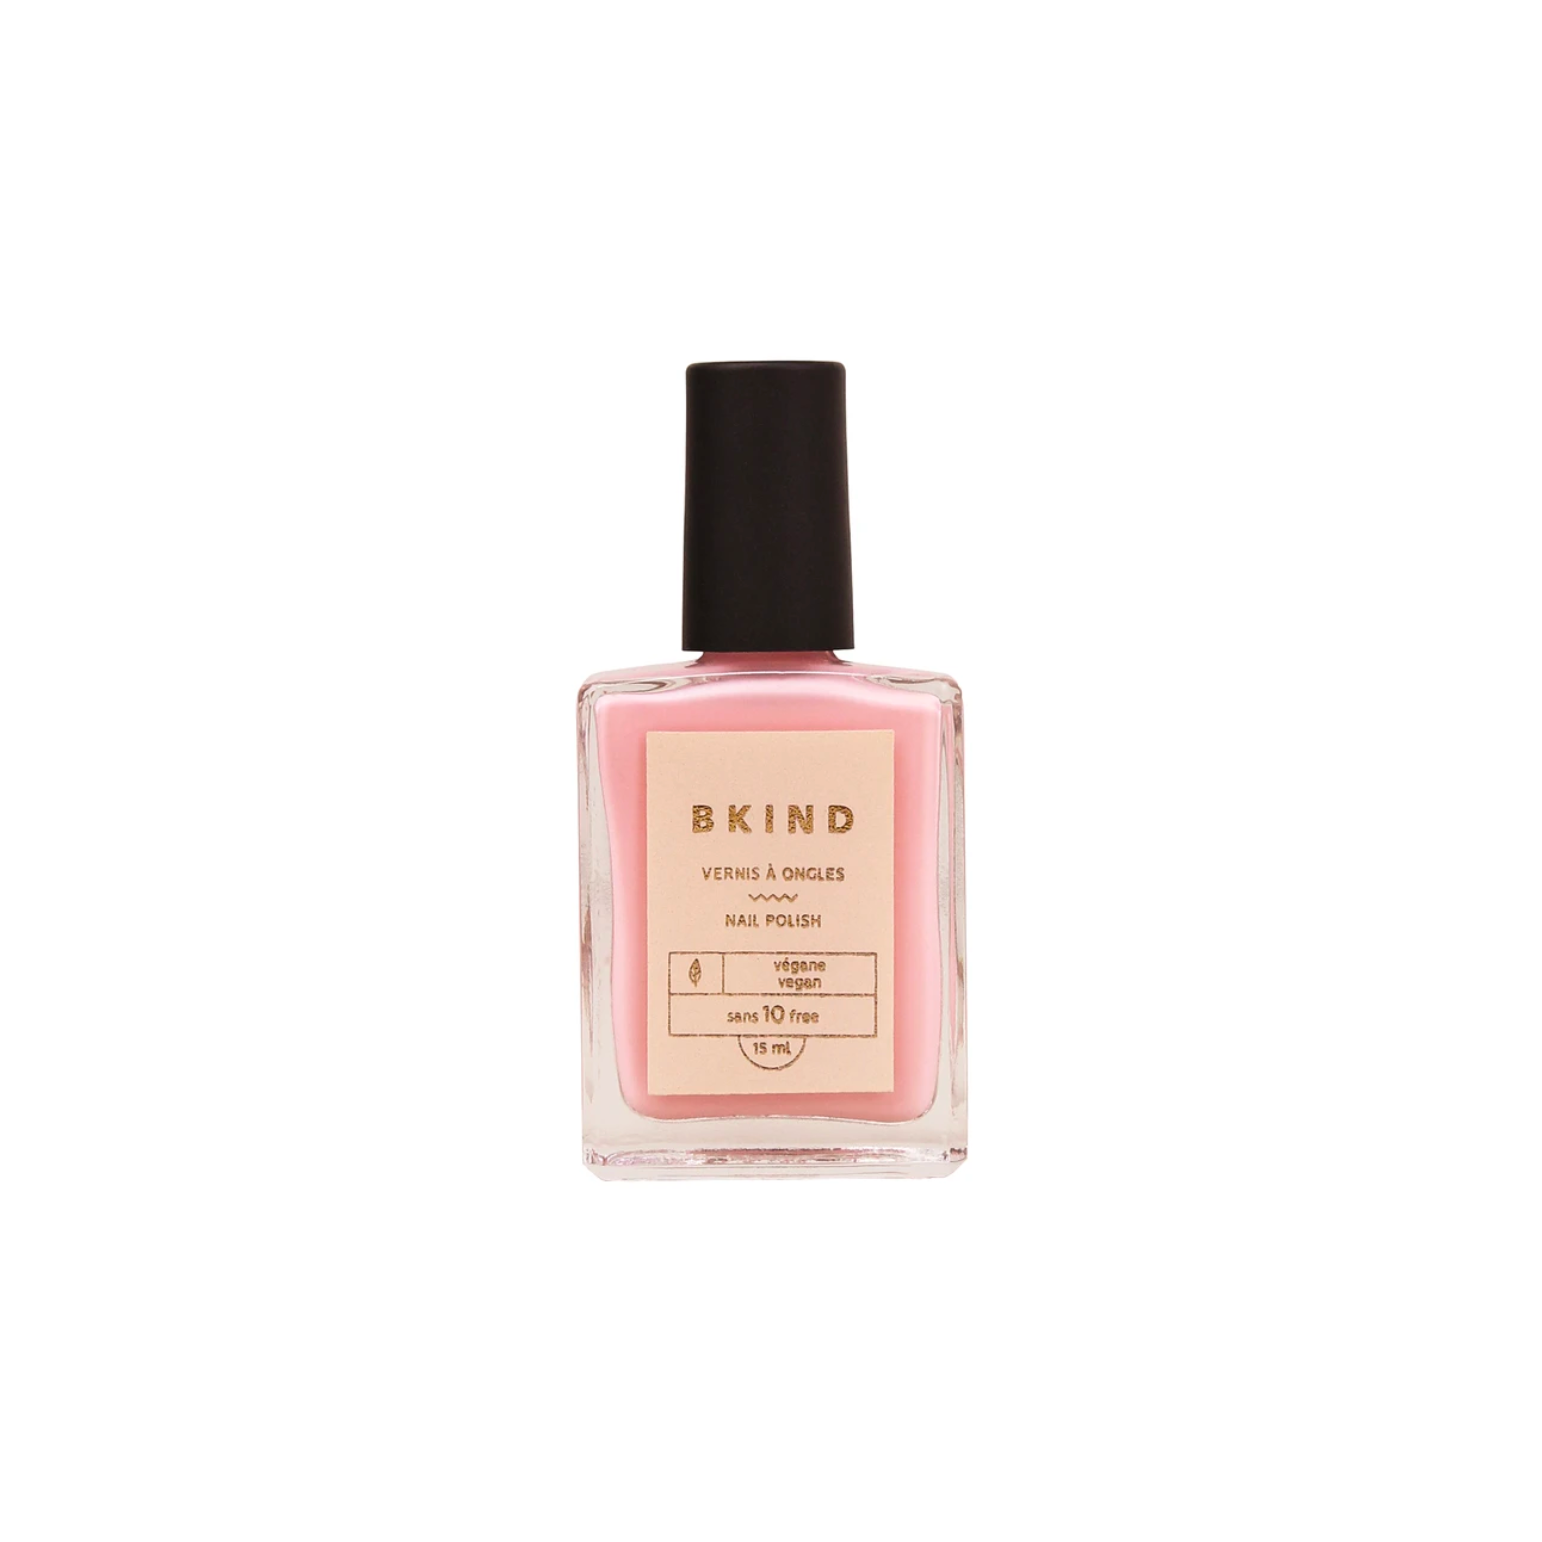 Nail polish does not call me by bkind